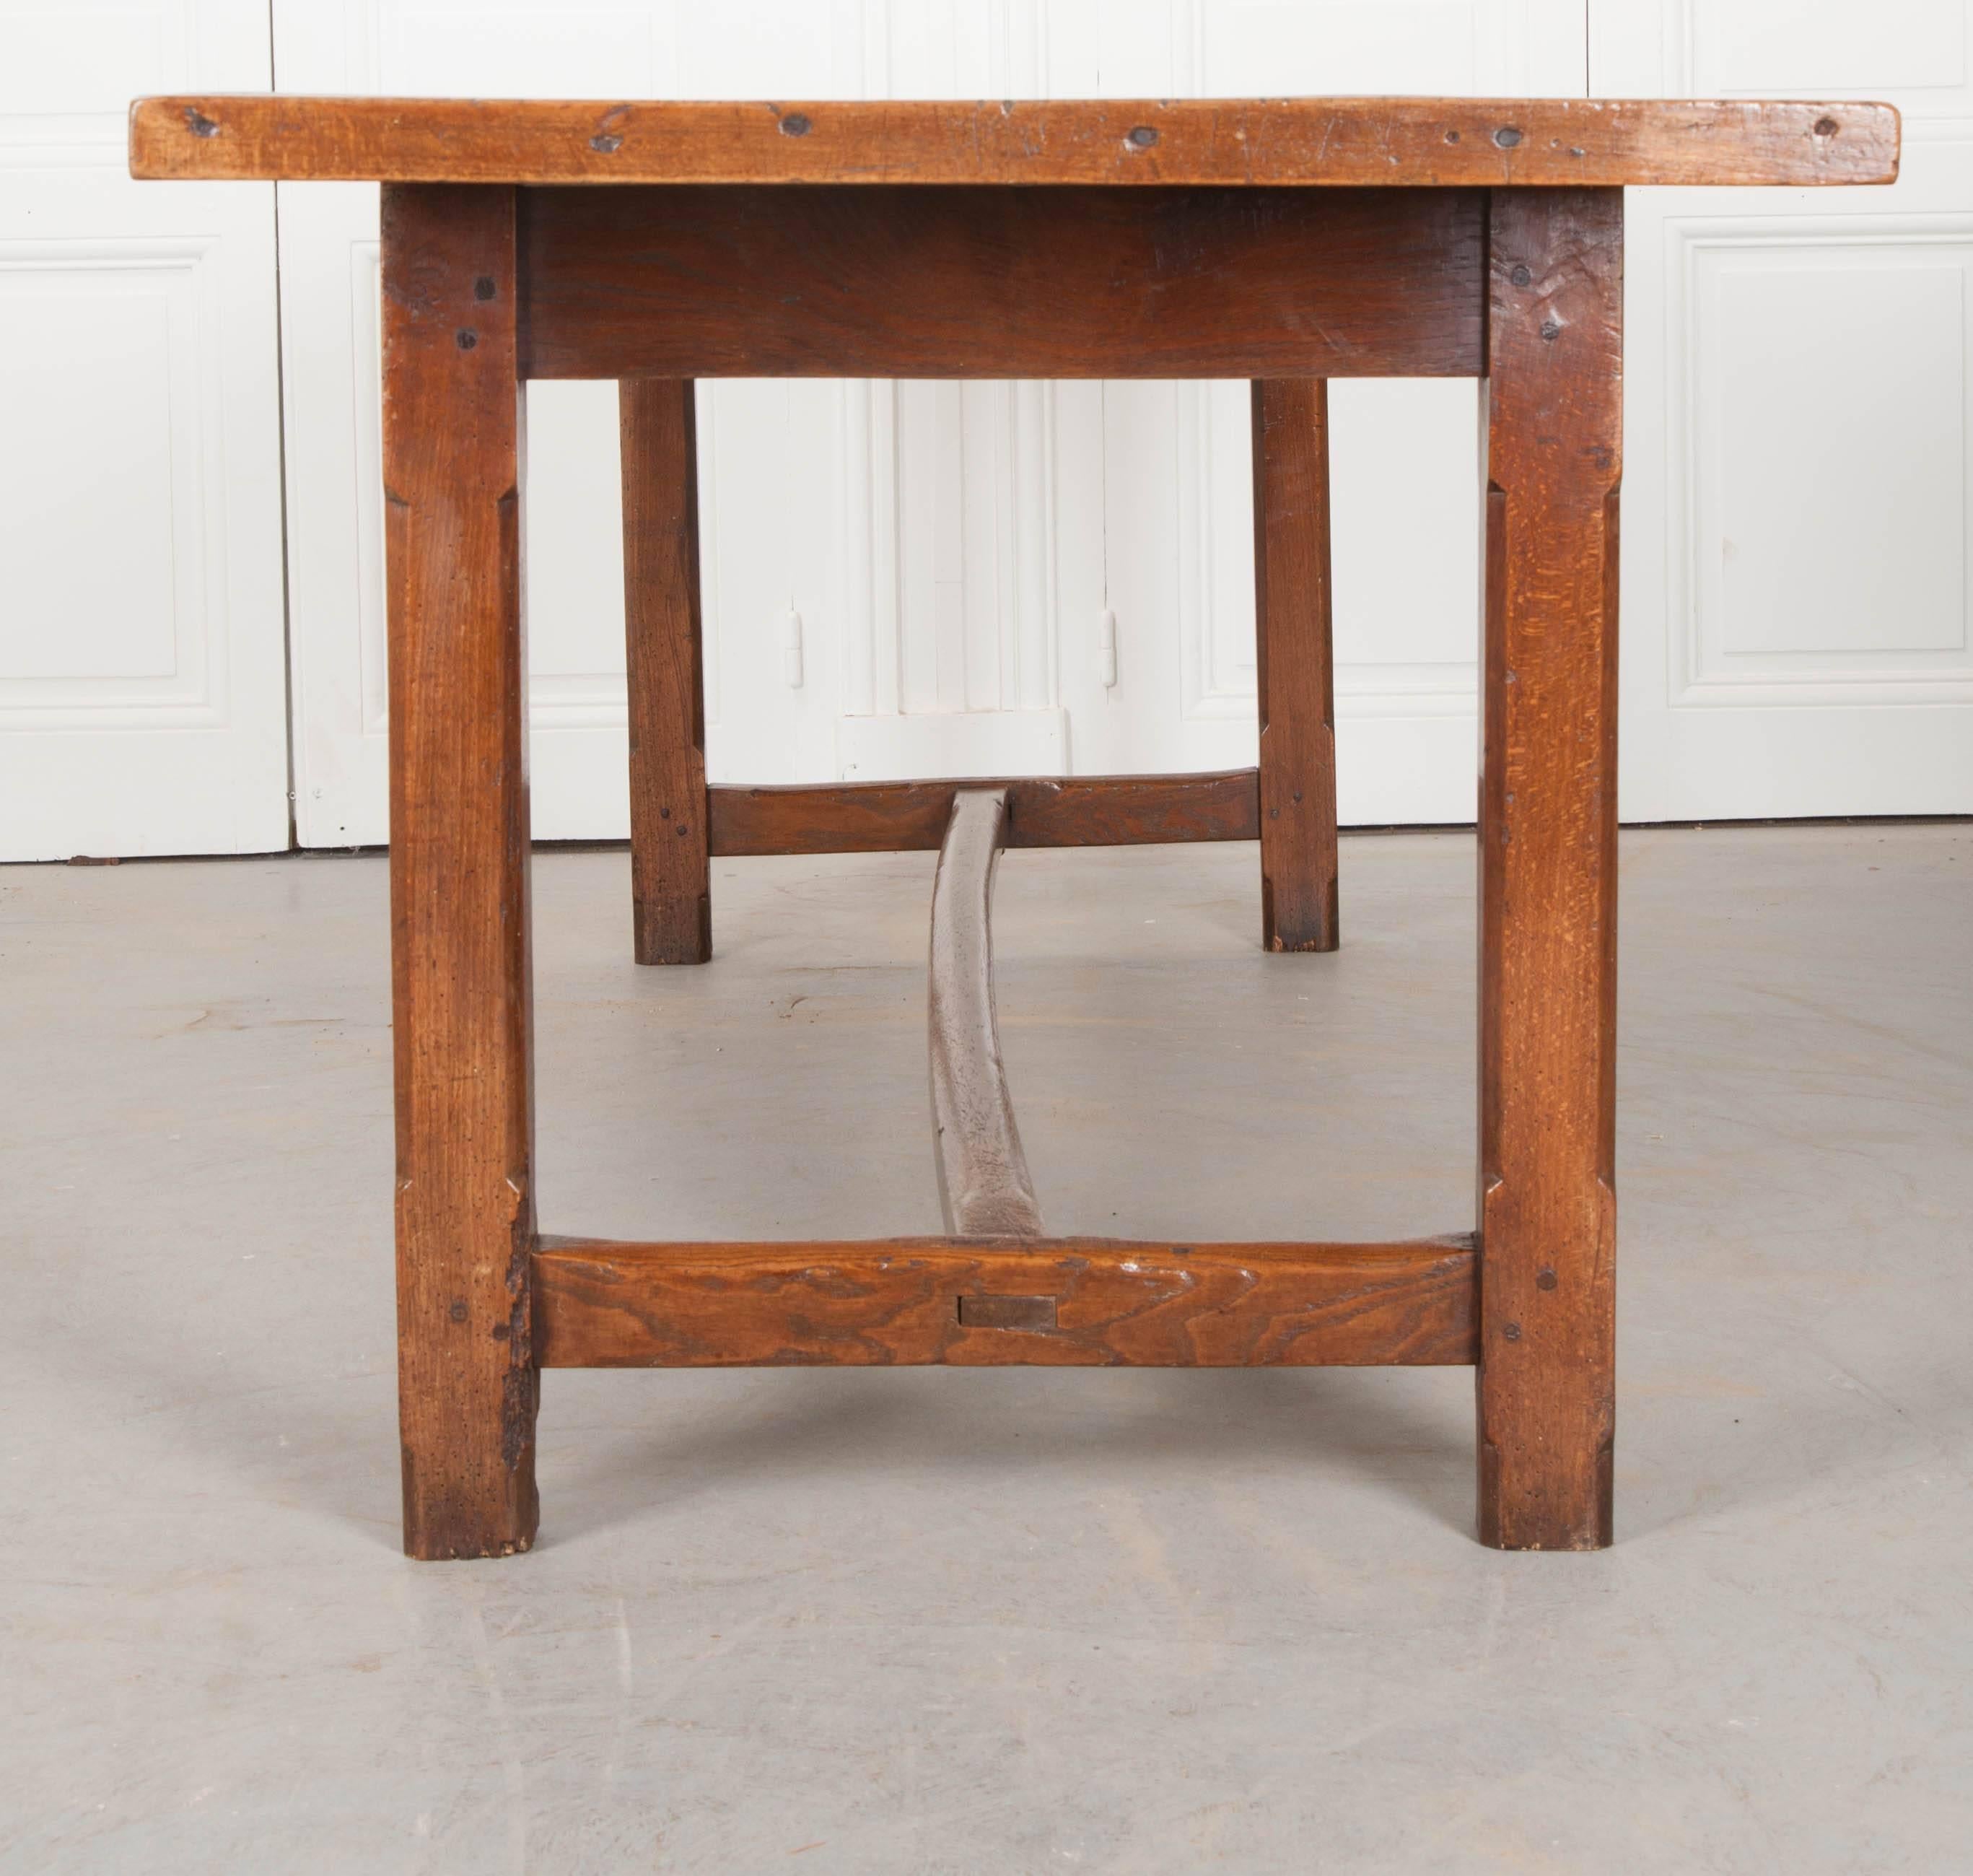 A gorgeous solid-oak farmhouse table from Cotswold, England, circa 1720. Designated an area of outstanding natural beauty, The Cotswold is a bucolic region in south-central England known for their rolling hills and wonderful stone cottages. This